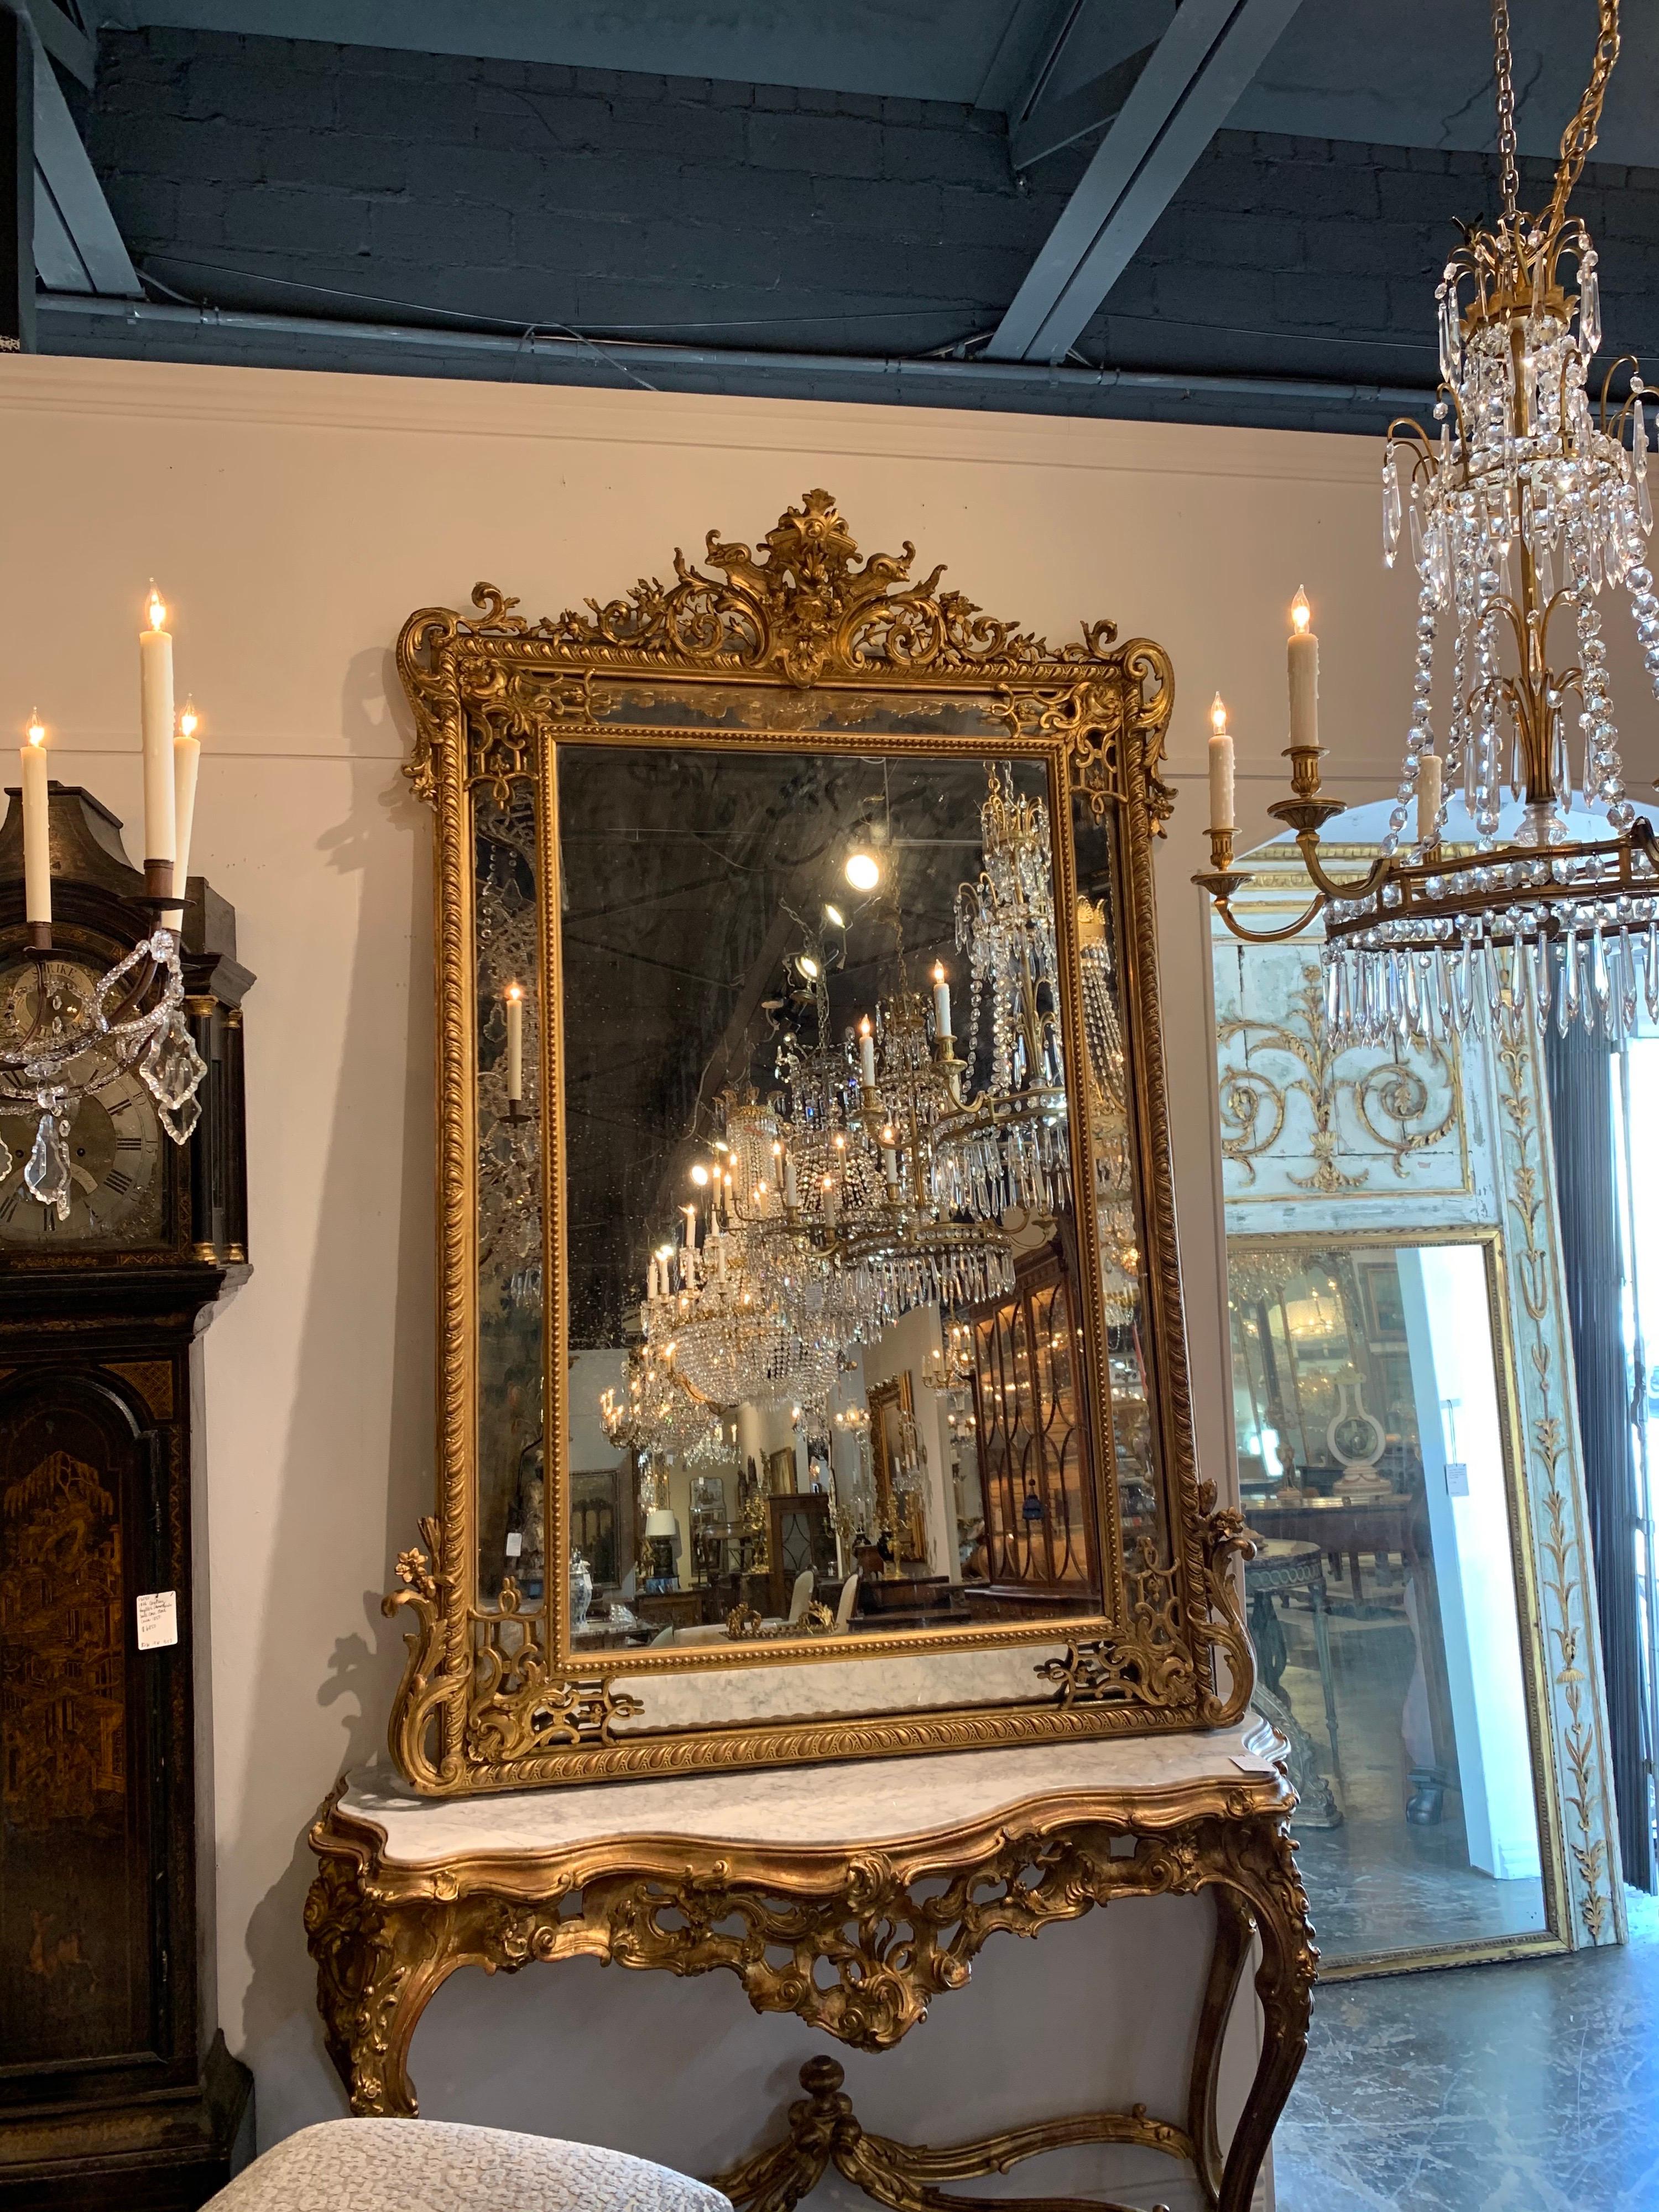 Stunning 19th century French Louis XV style large scale carved and giltwood cushion mirror. Very fine carving on this mirror including scrolling and floral images.
Exceptional quality!